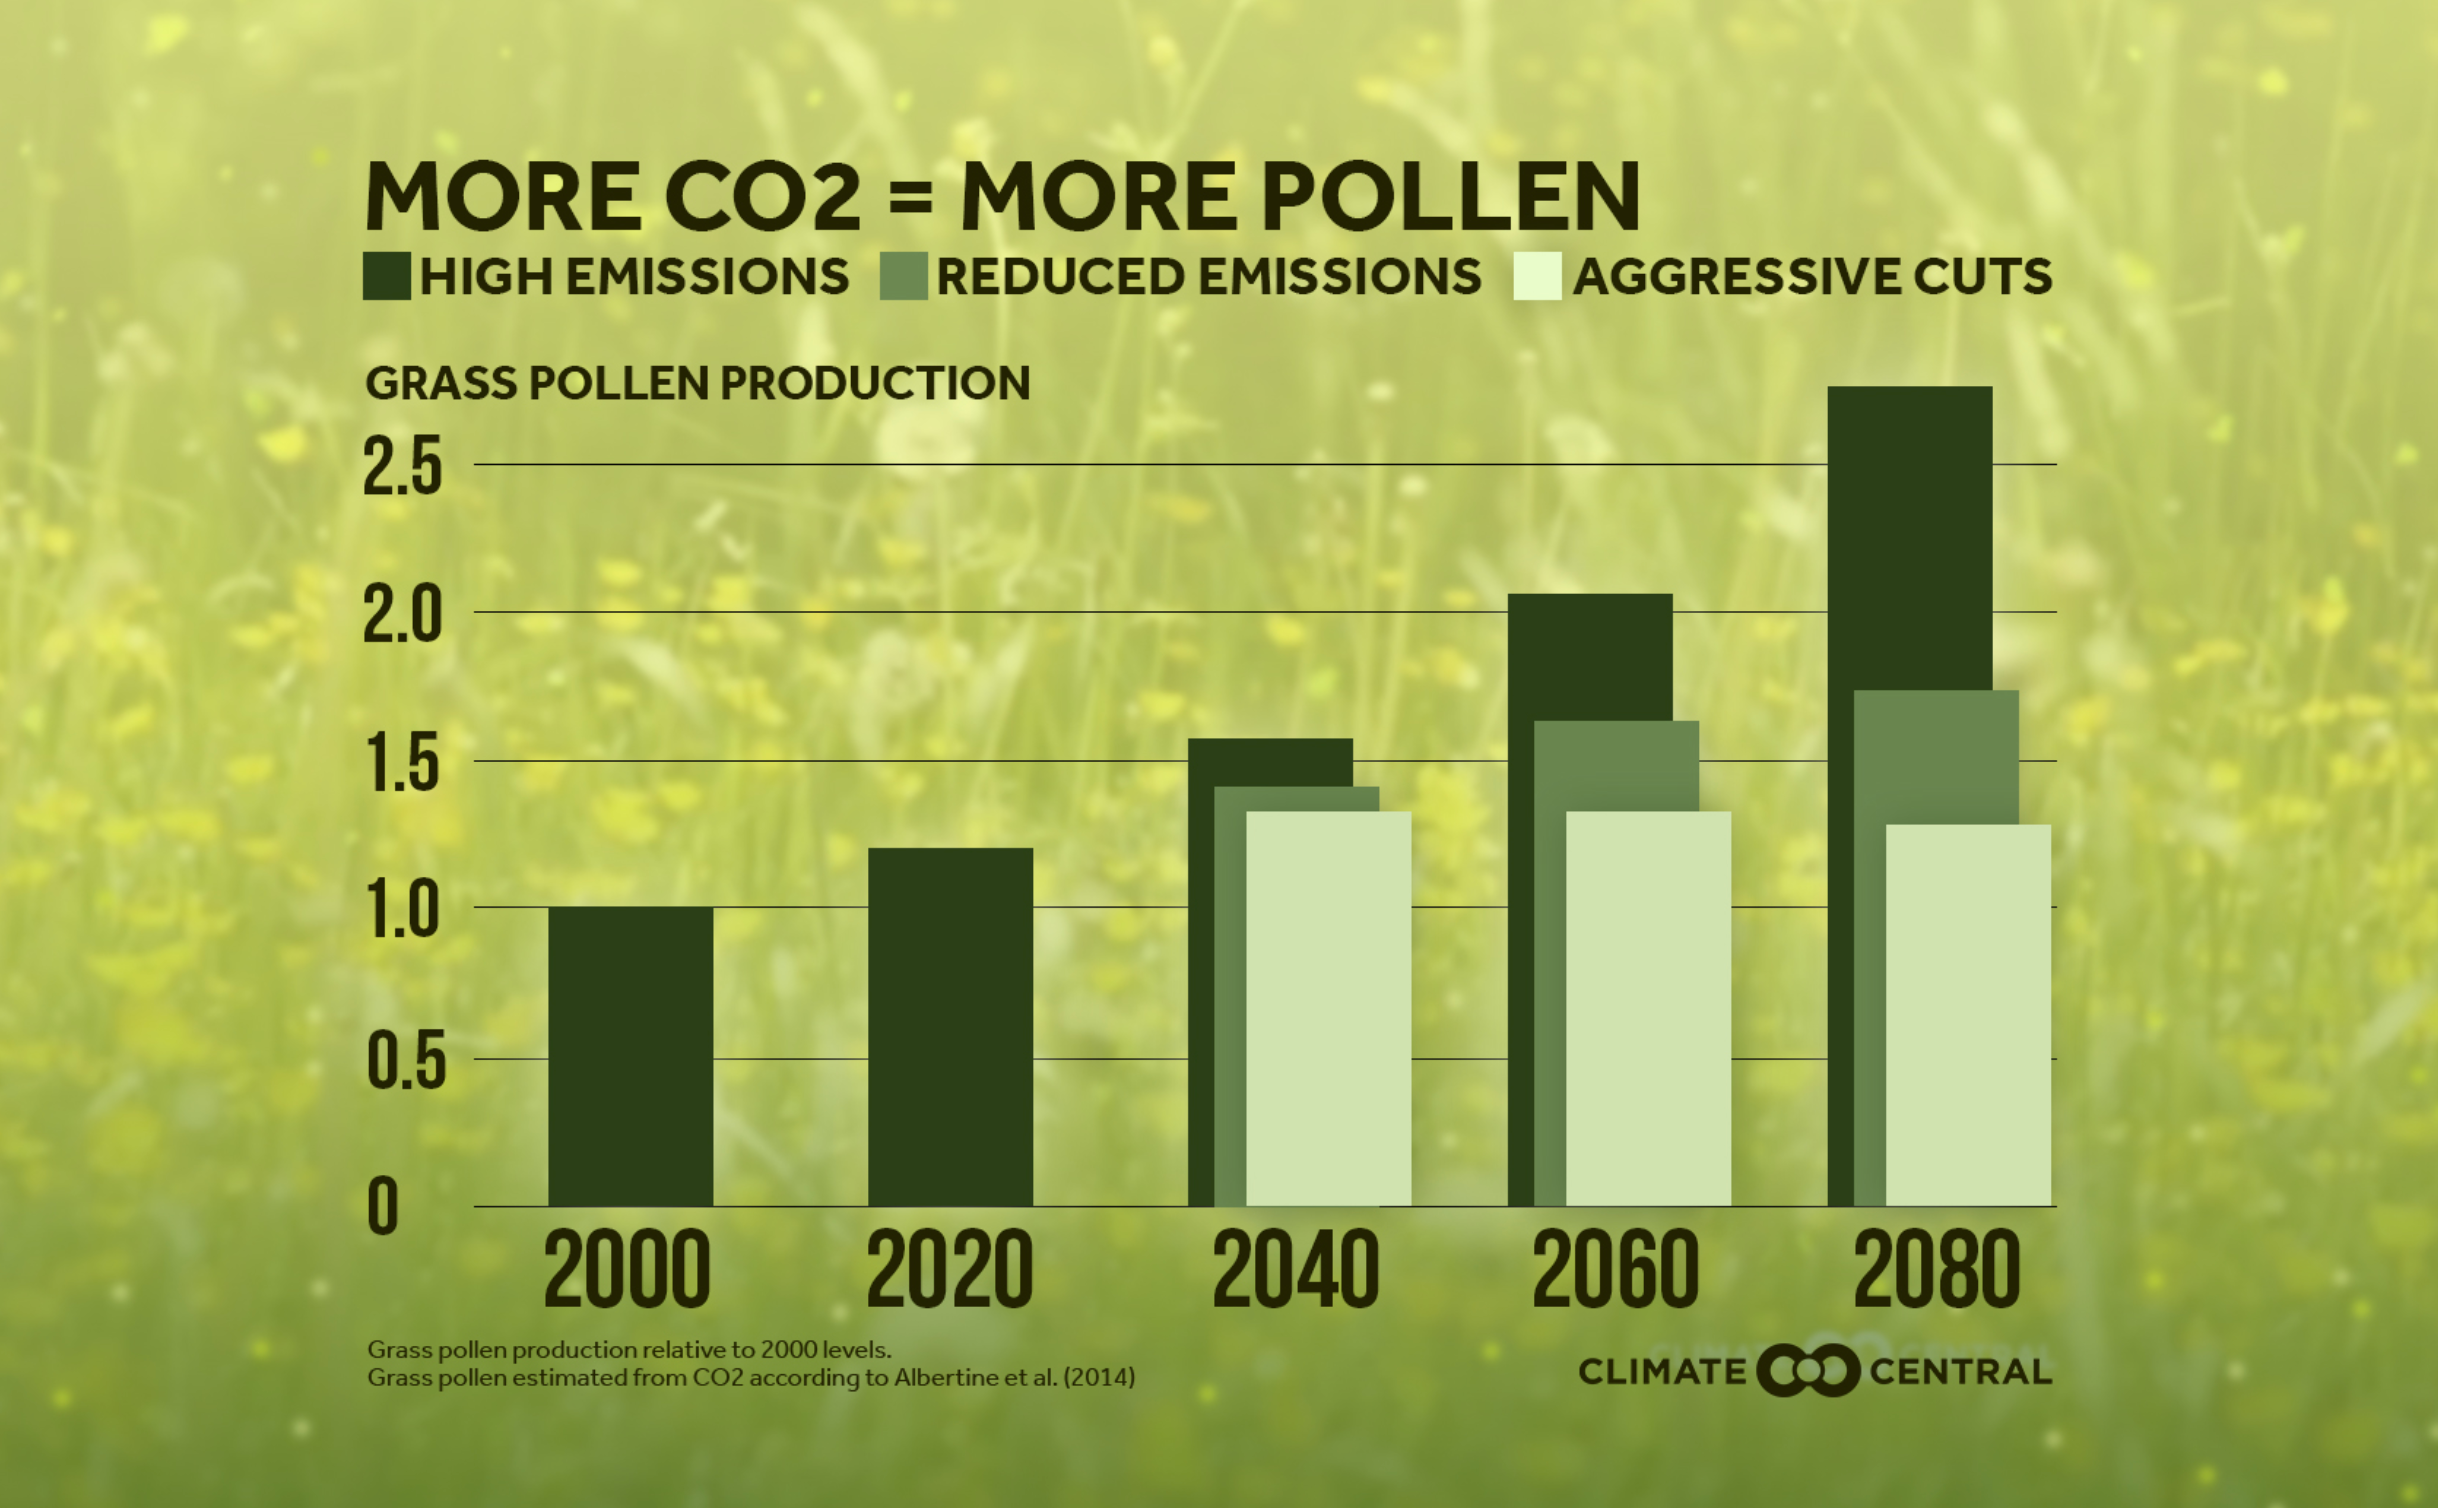 The graph shows the link between high carbon emissions from burning fossil fuels and increasing pollen counts